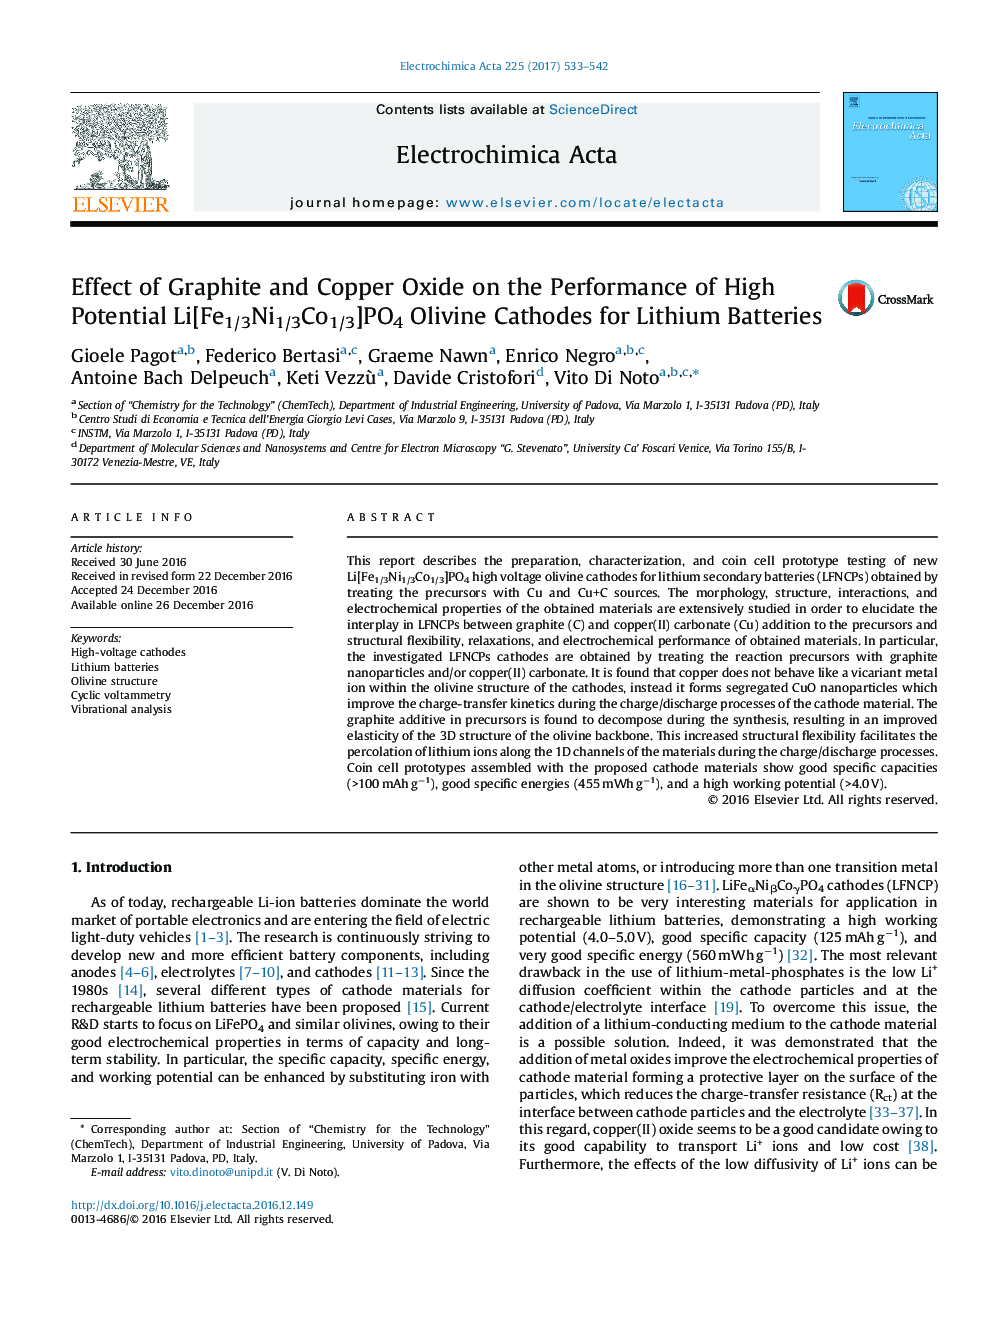 Effect of Graphite and Copper Oxide on the Performance of High Potential Li[Fe1/3Ni1/3Co1/3]PO4 Olivine Cathodes for Lithium Batteries